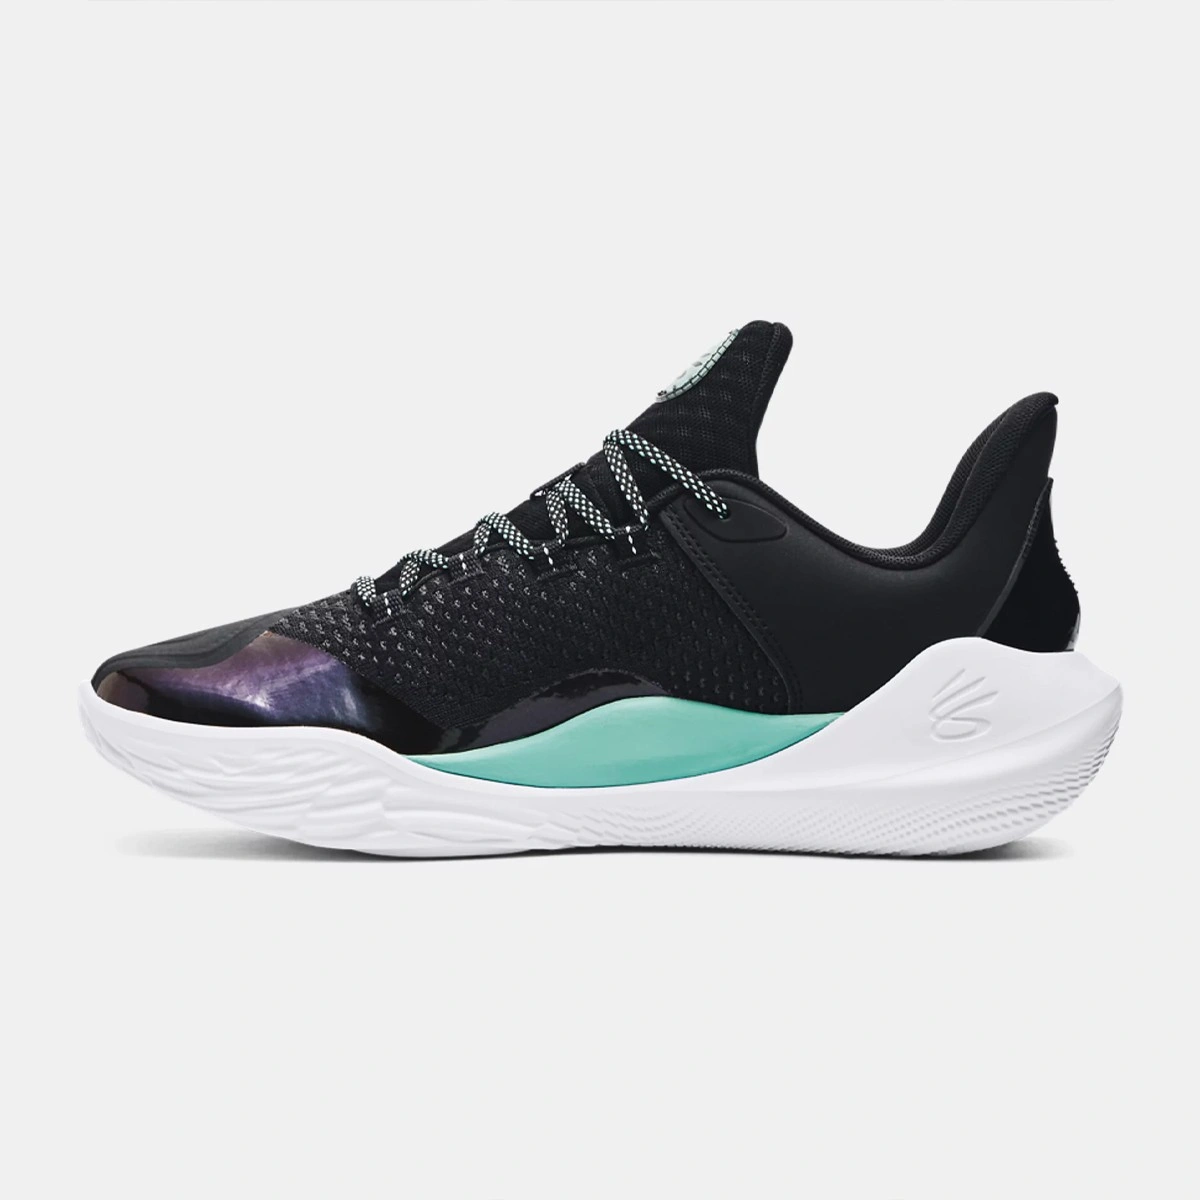 Under Armour Unisex Παπούτσια Μπάσκετ Unisex Curry 11 'Future Curry'  Basketball Shoes - 3027416-100 - Spot Team